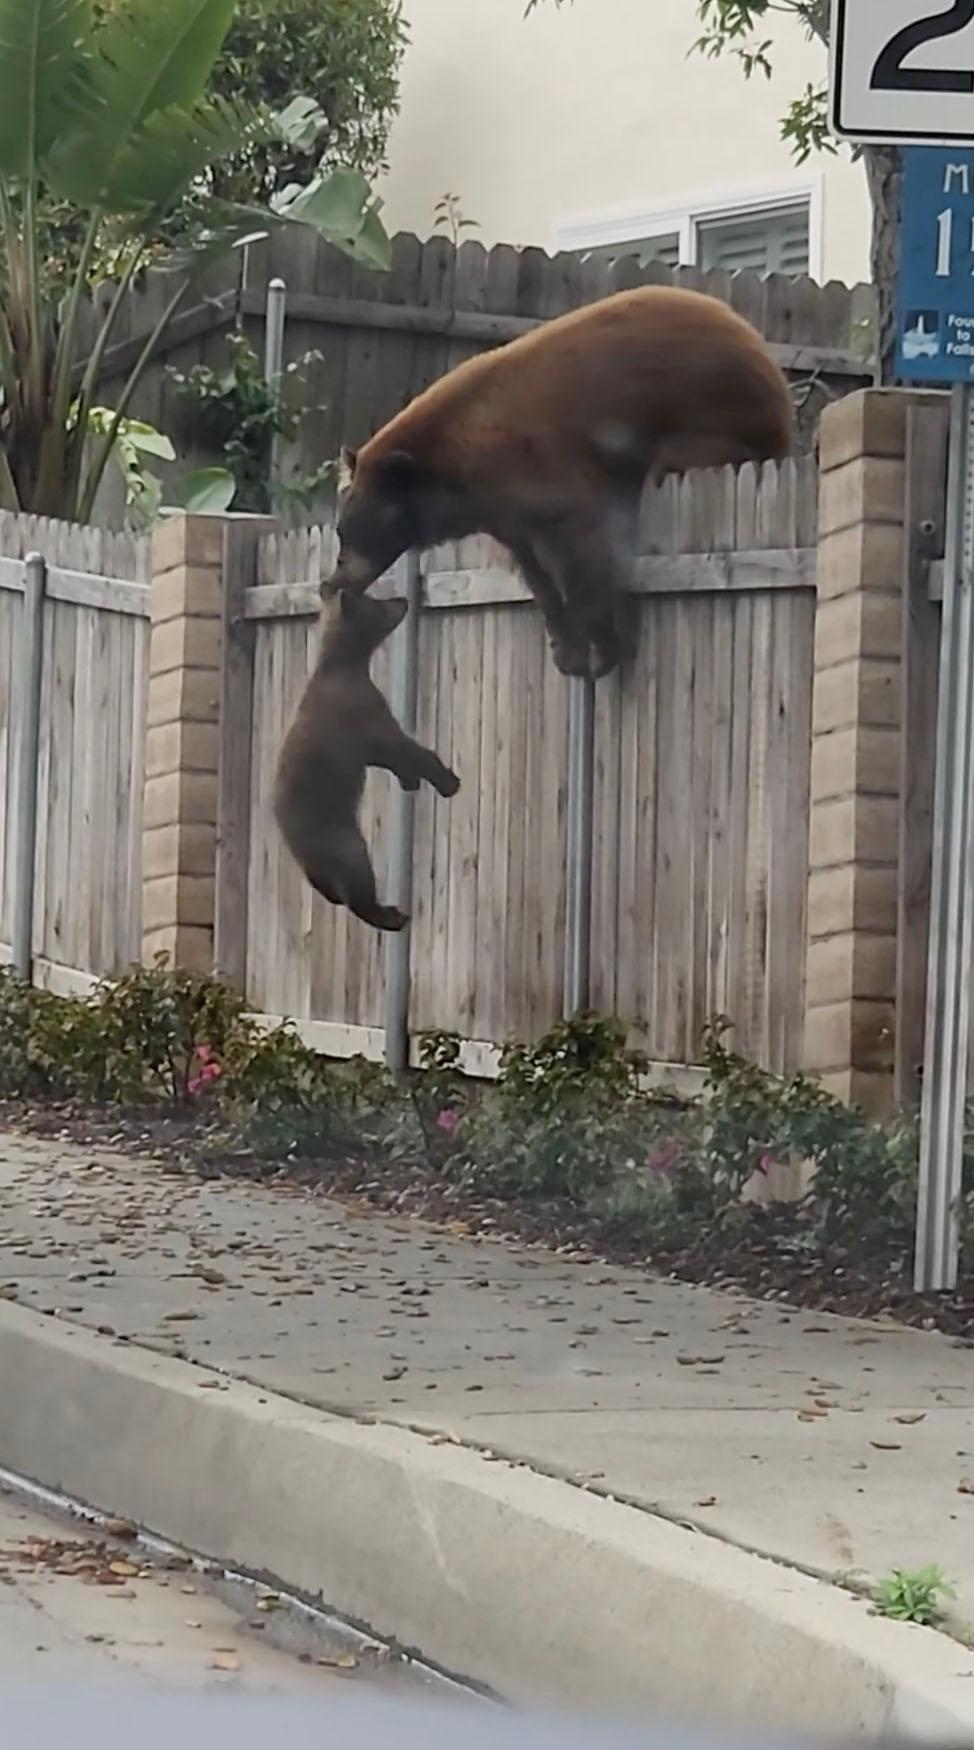 Mama Bear helps her second cub successfully climb over the wooden fence. (Screenshot/Viralhog)